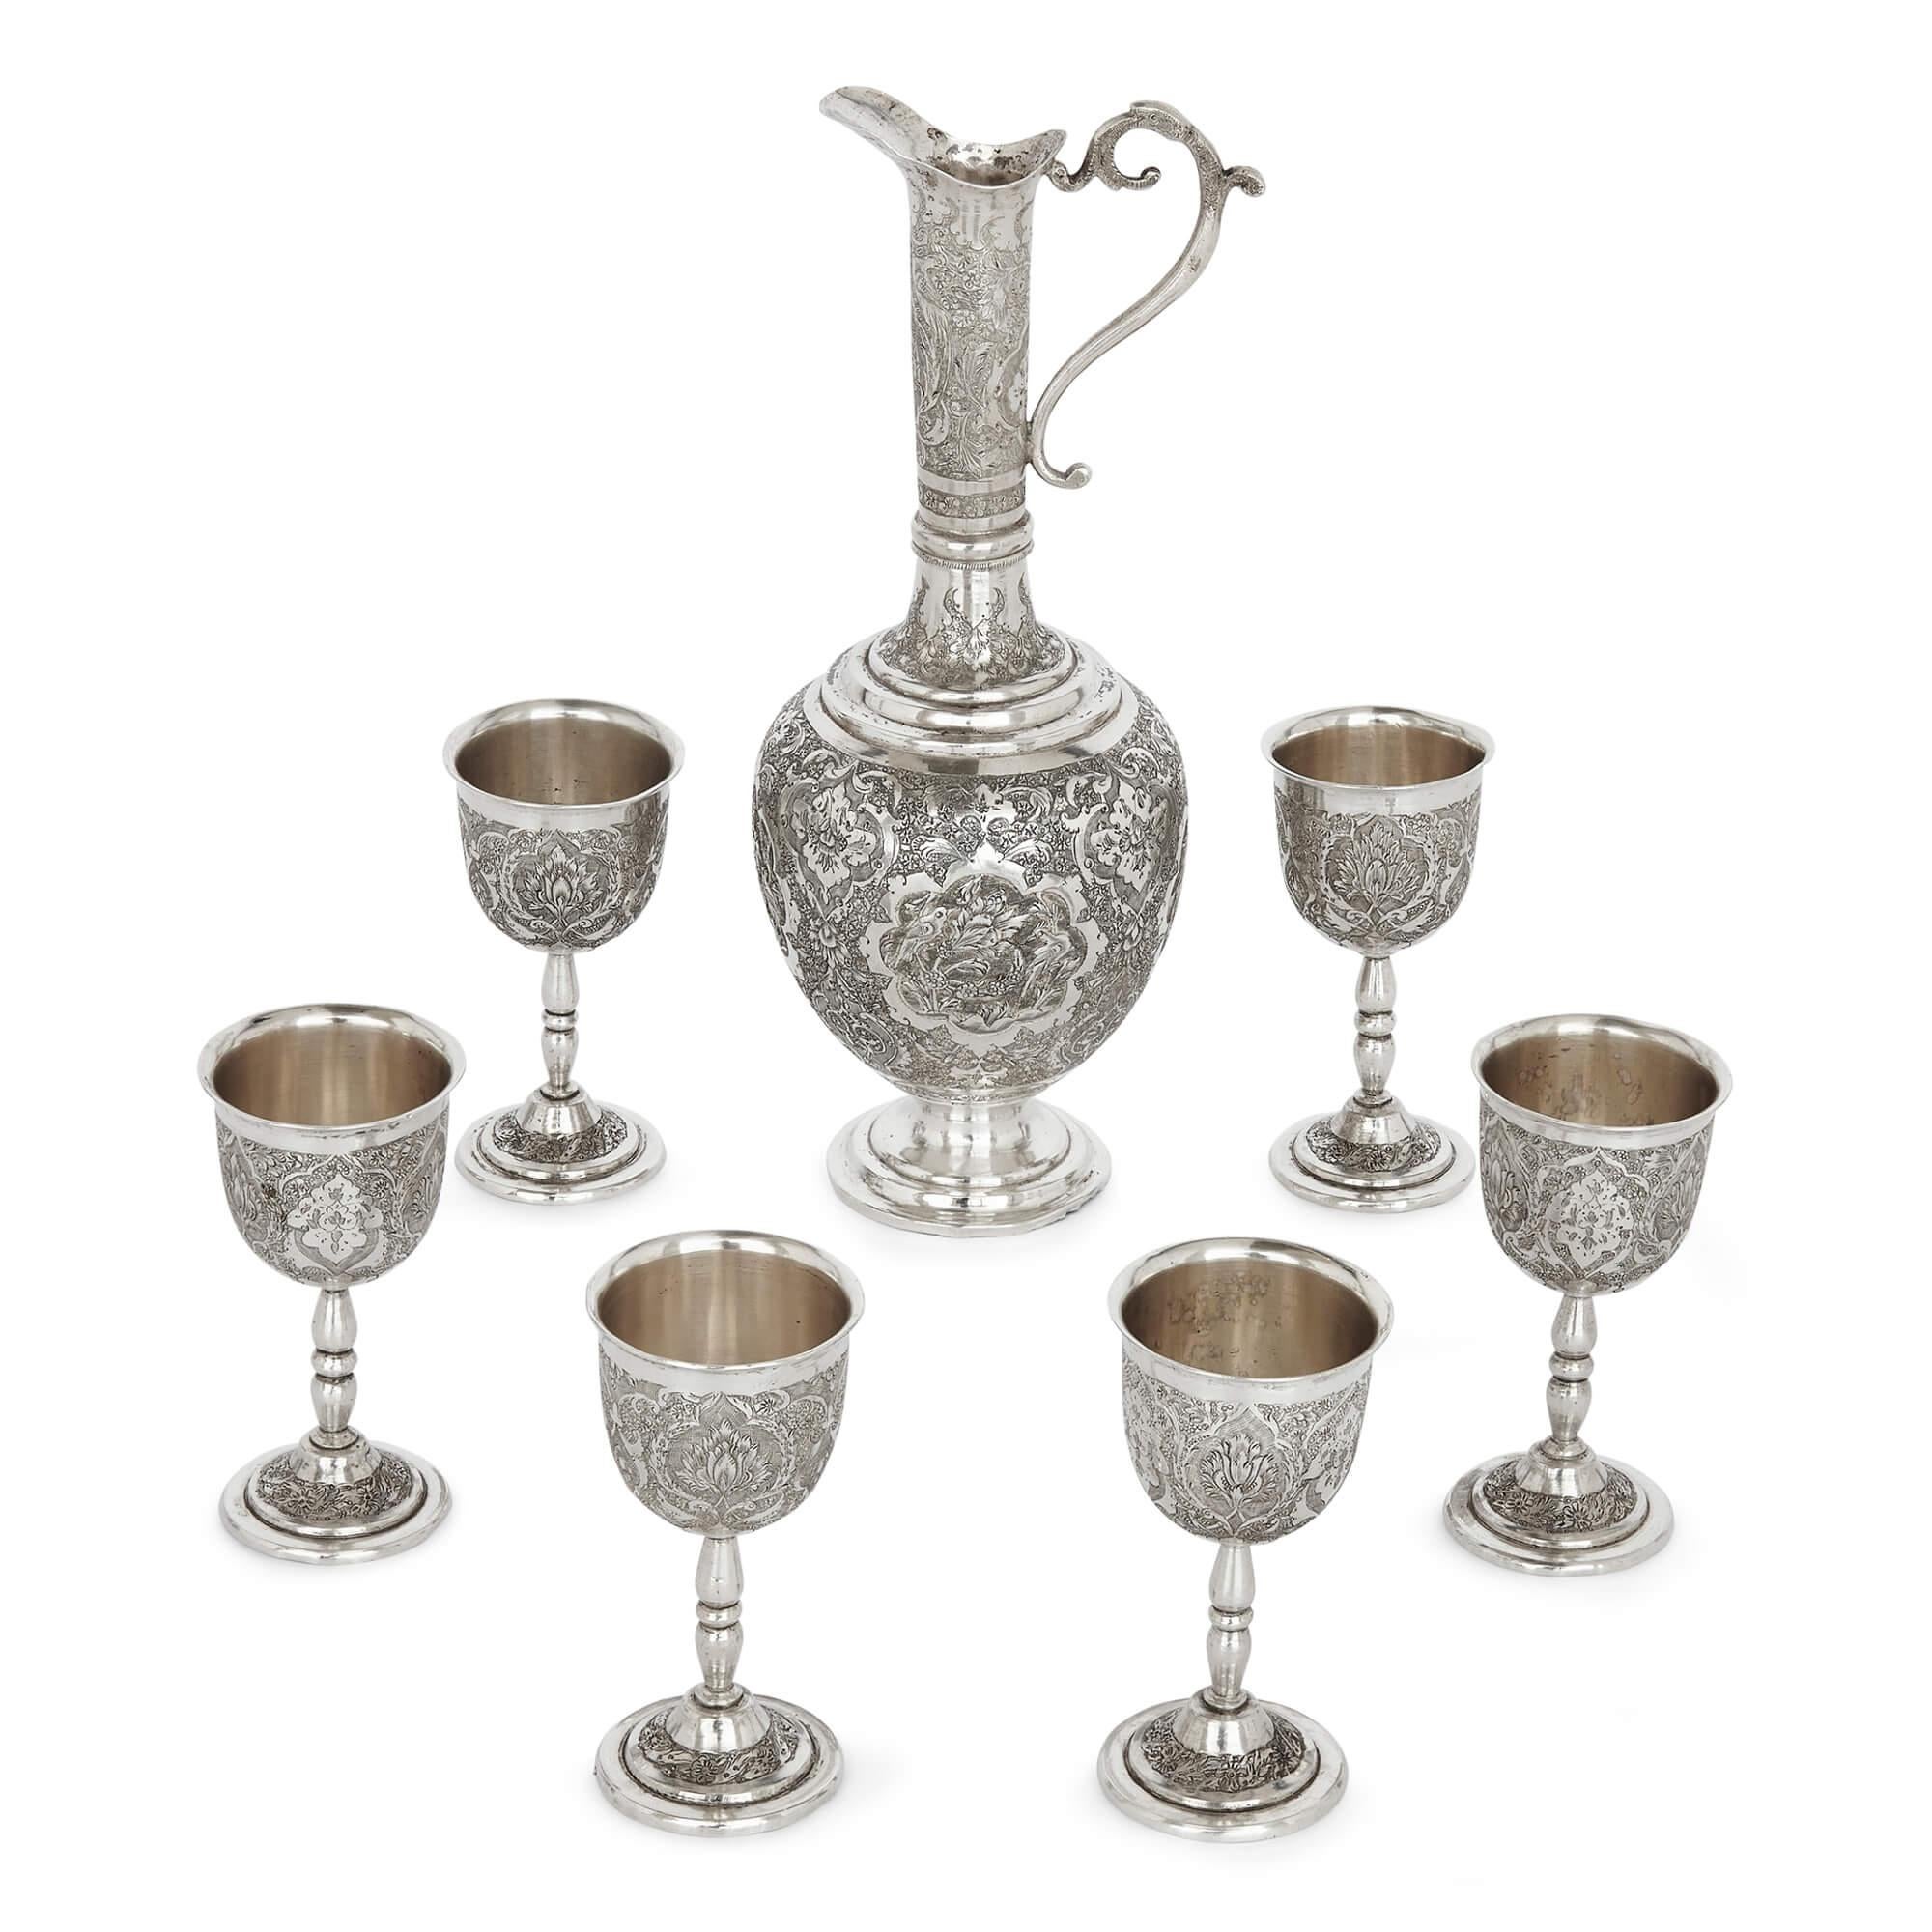 A collection of Persian silverware and tableware
Persian, Early 20th Century
Box: height 3cm, width 16.5cm, depth 9.5cm
Vases: height 41cm, diameter 12cm

Examples of superb 20th century Persian metalwork, this excellent silver collection